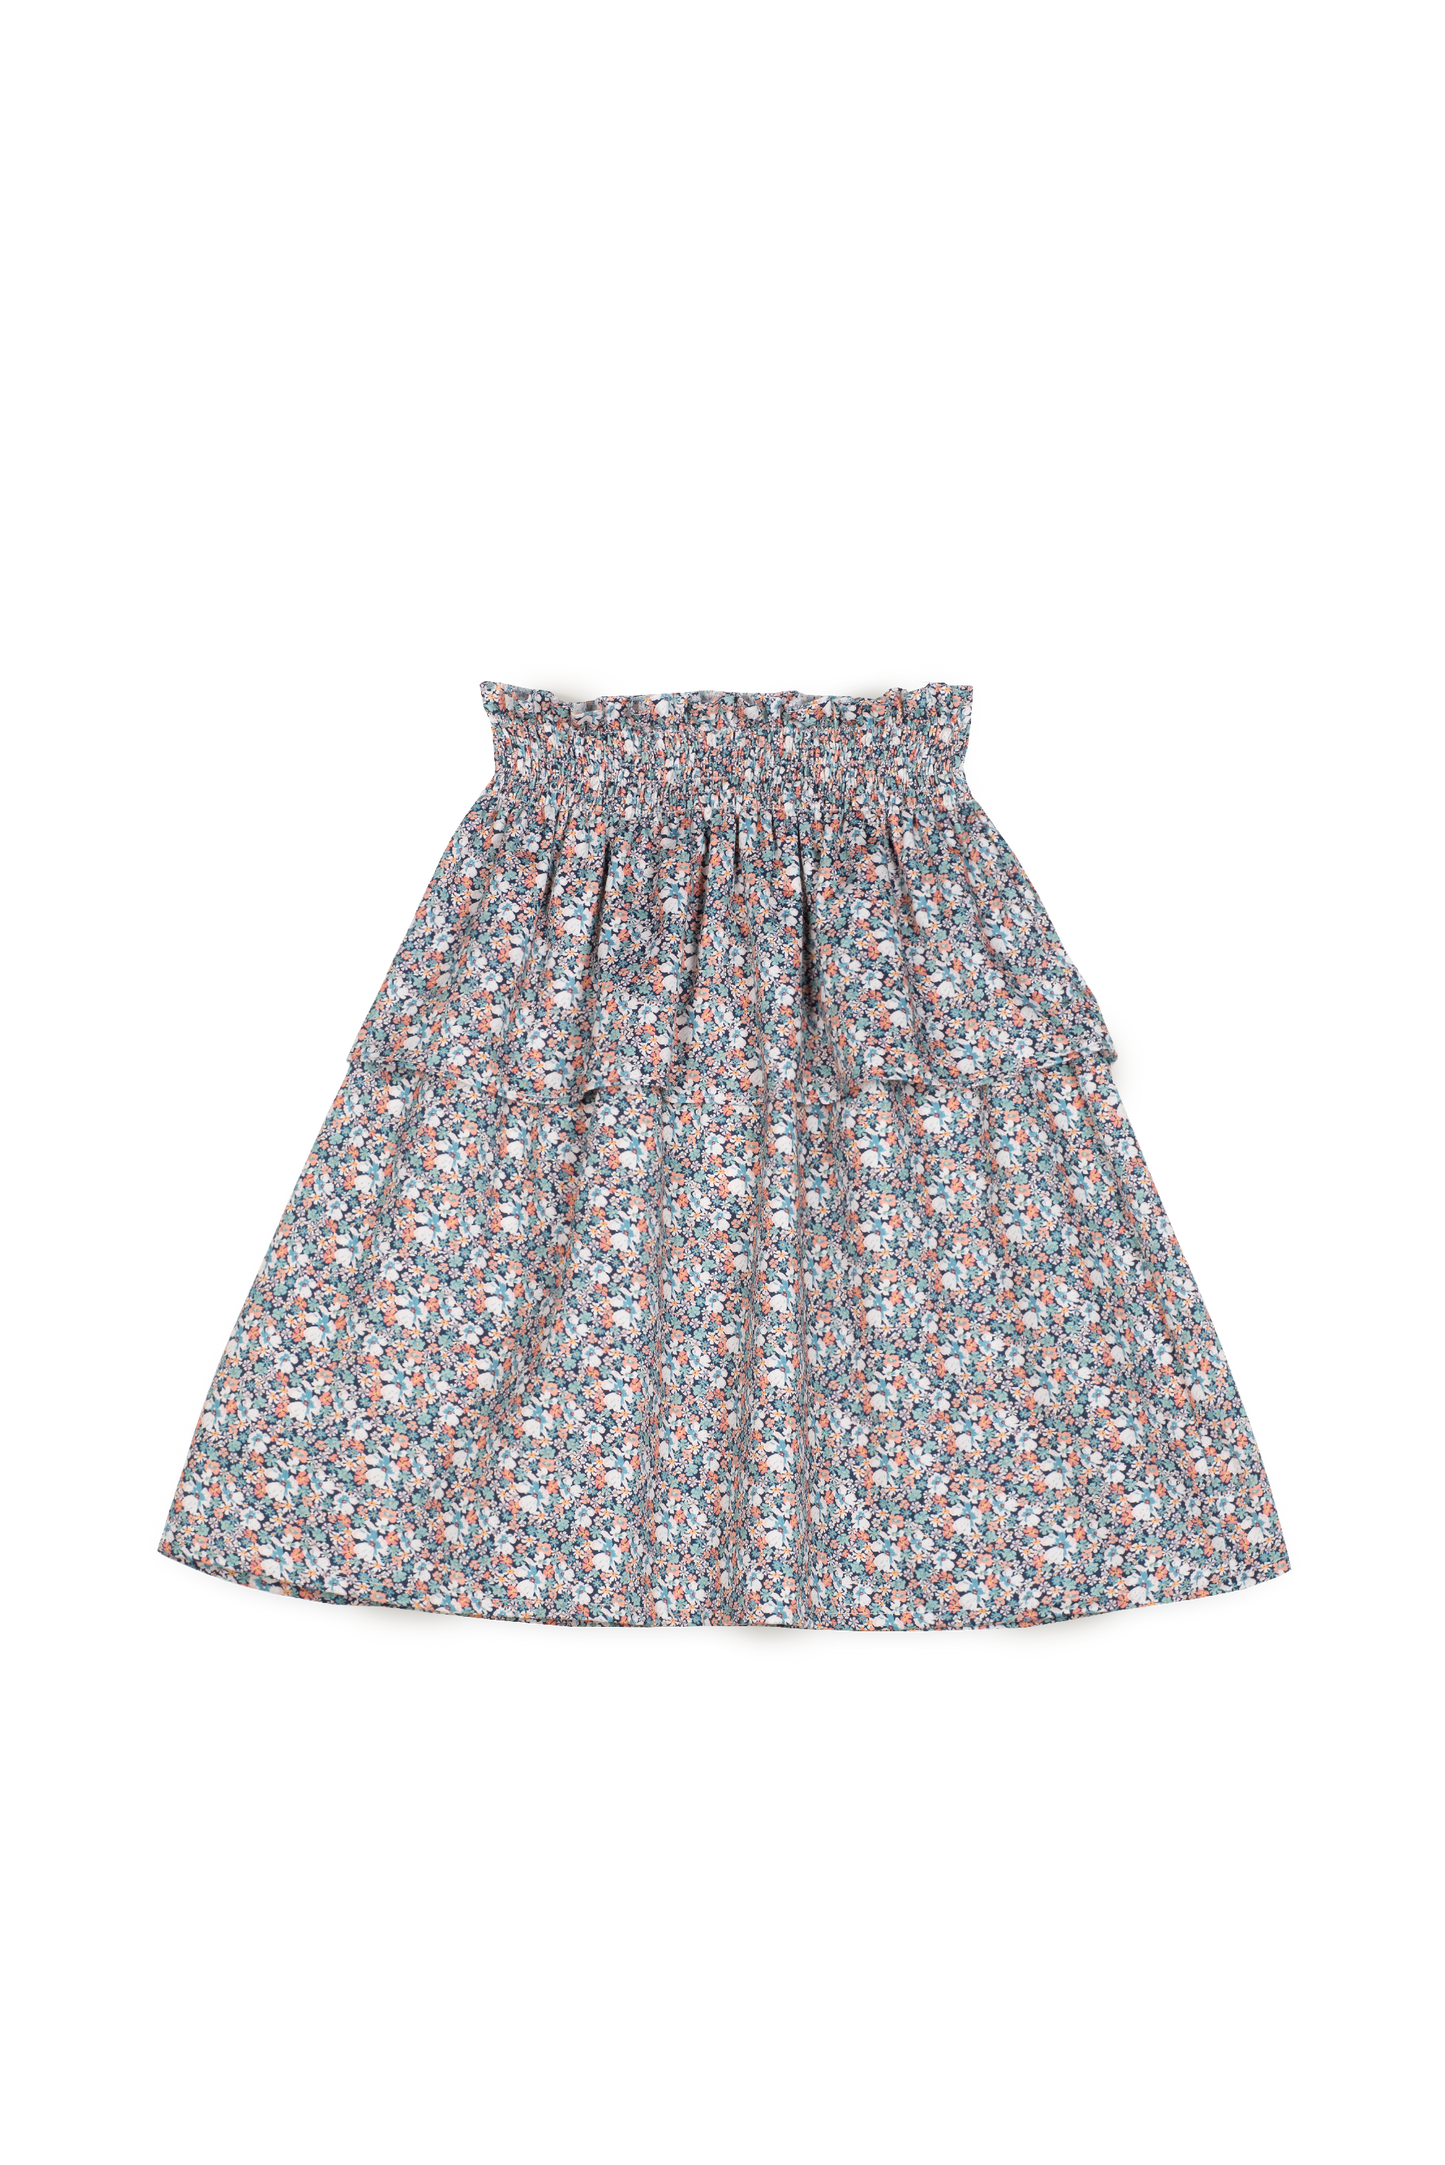 Mipounet Smocked floral skirt